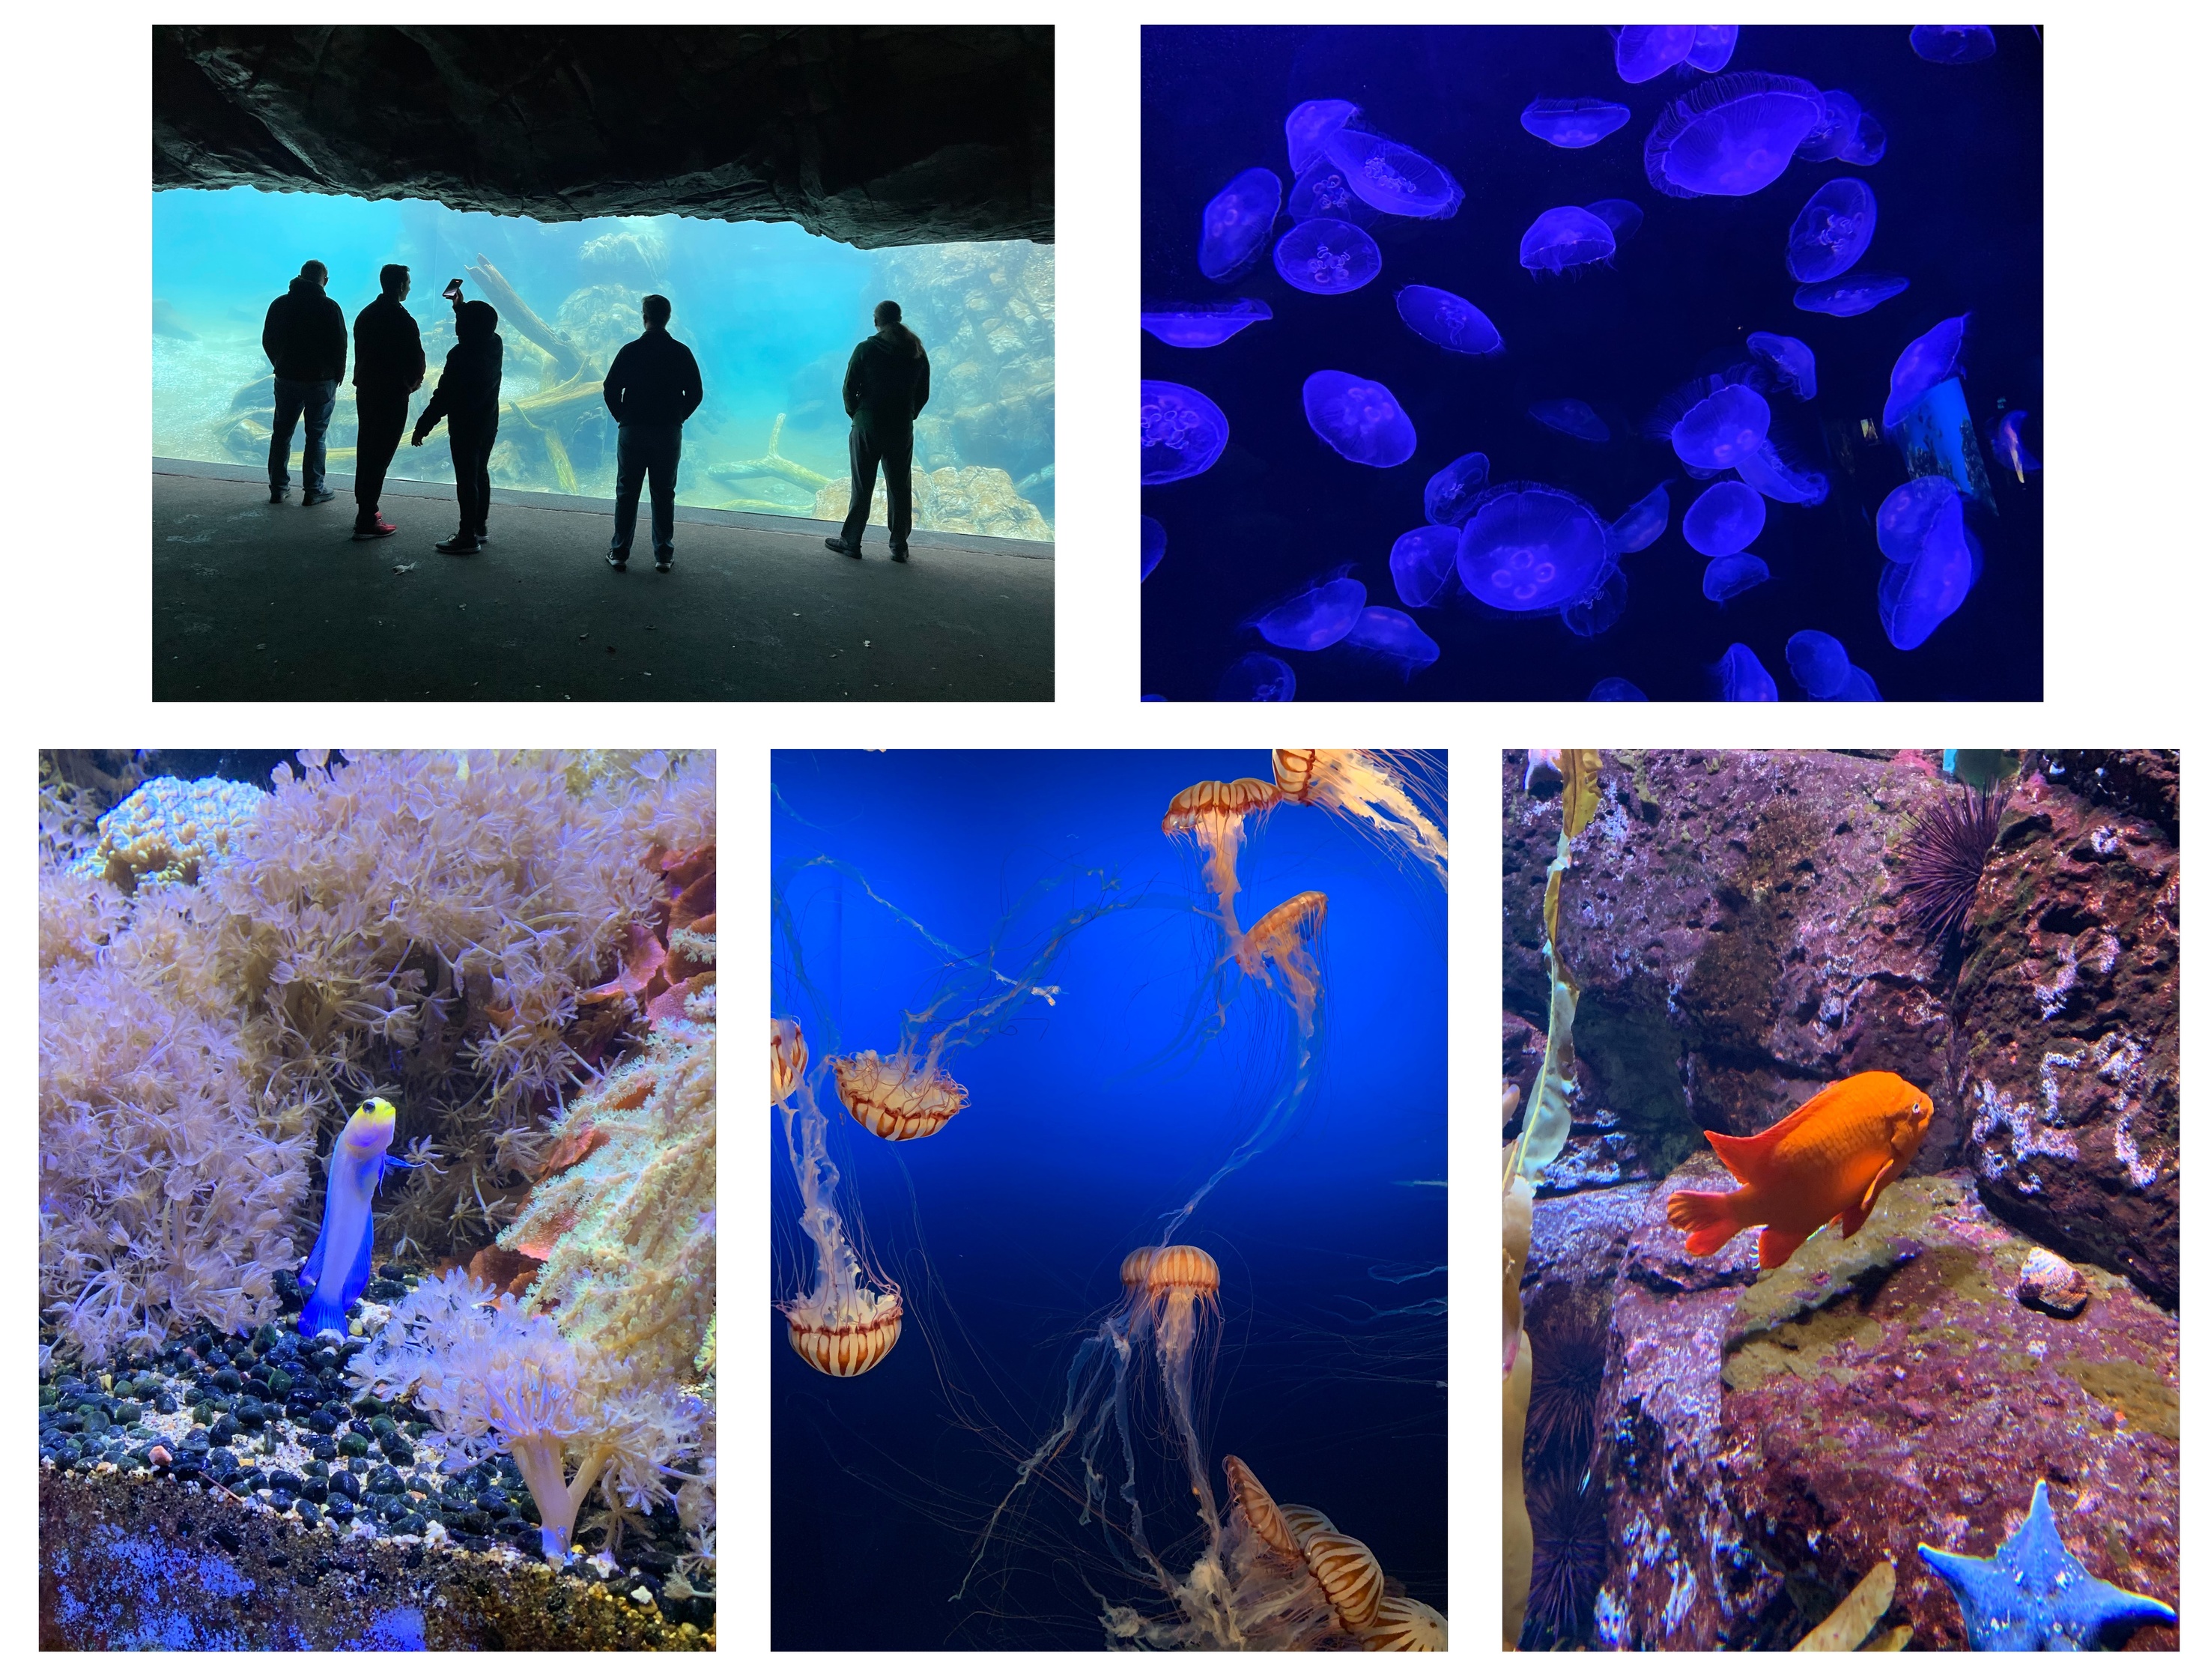 Collection of images showing various fish from the Henry Doorly Aquarium.